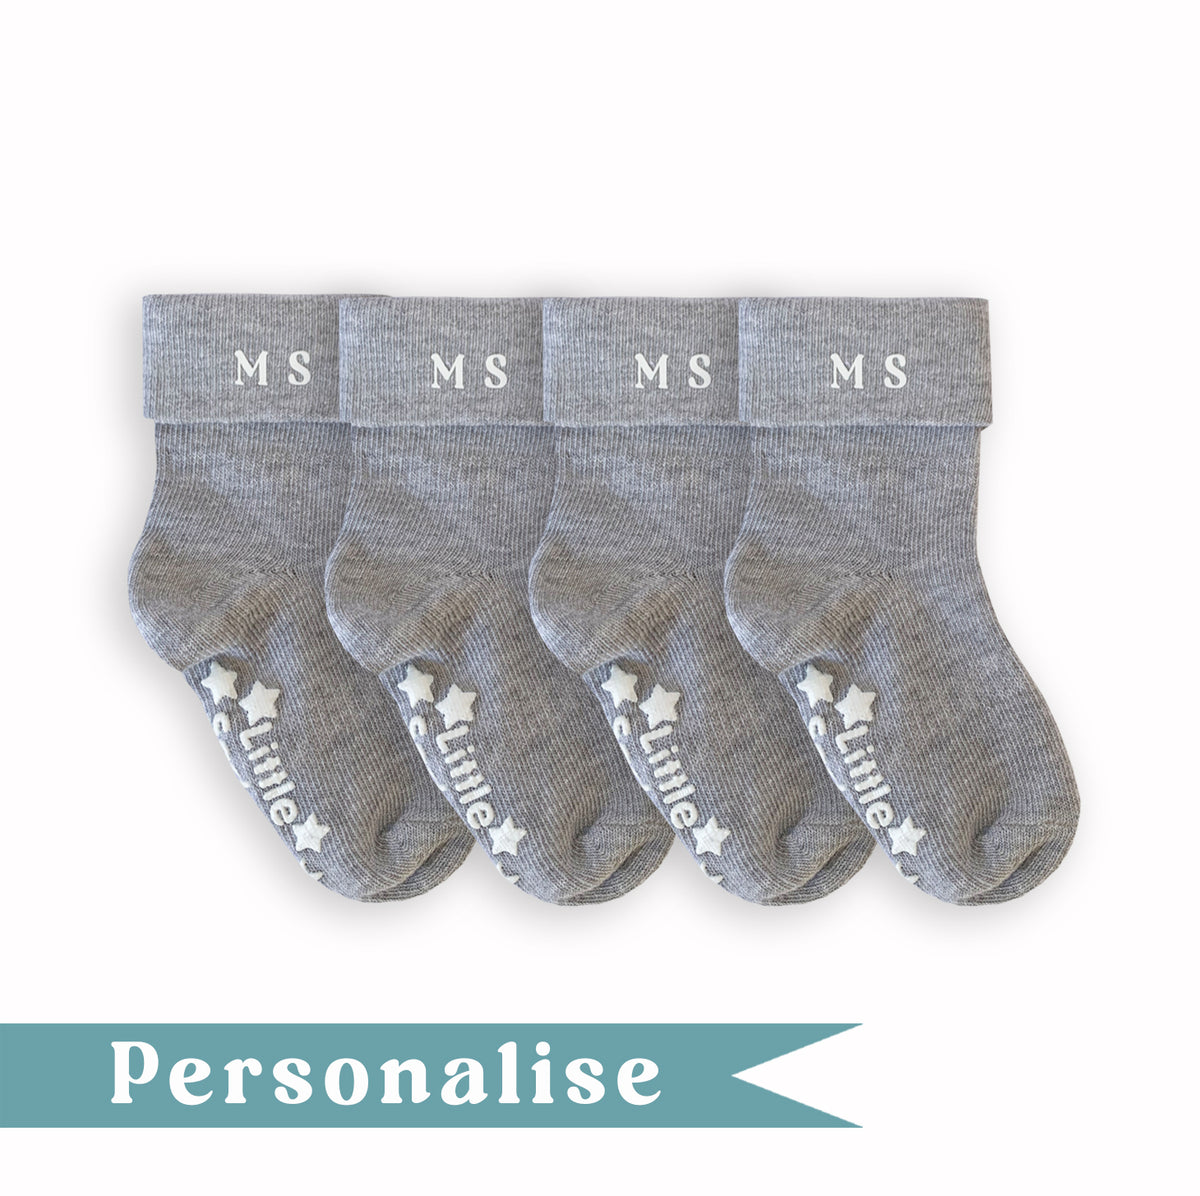 Personalised set of Multi-award winning Non-Slip Stay on Baby and Toddler Socks - Grey - 0-6 years